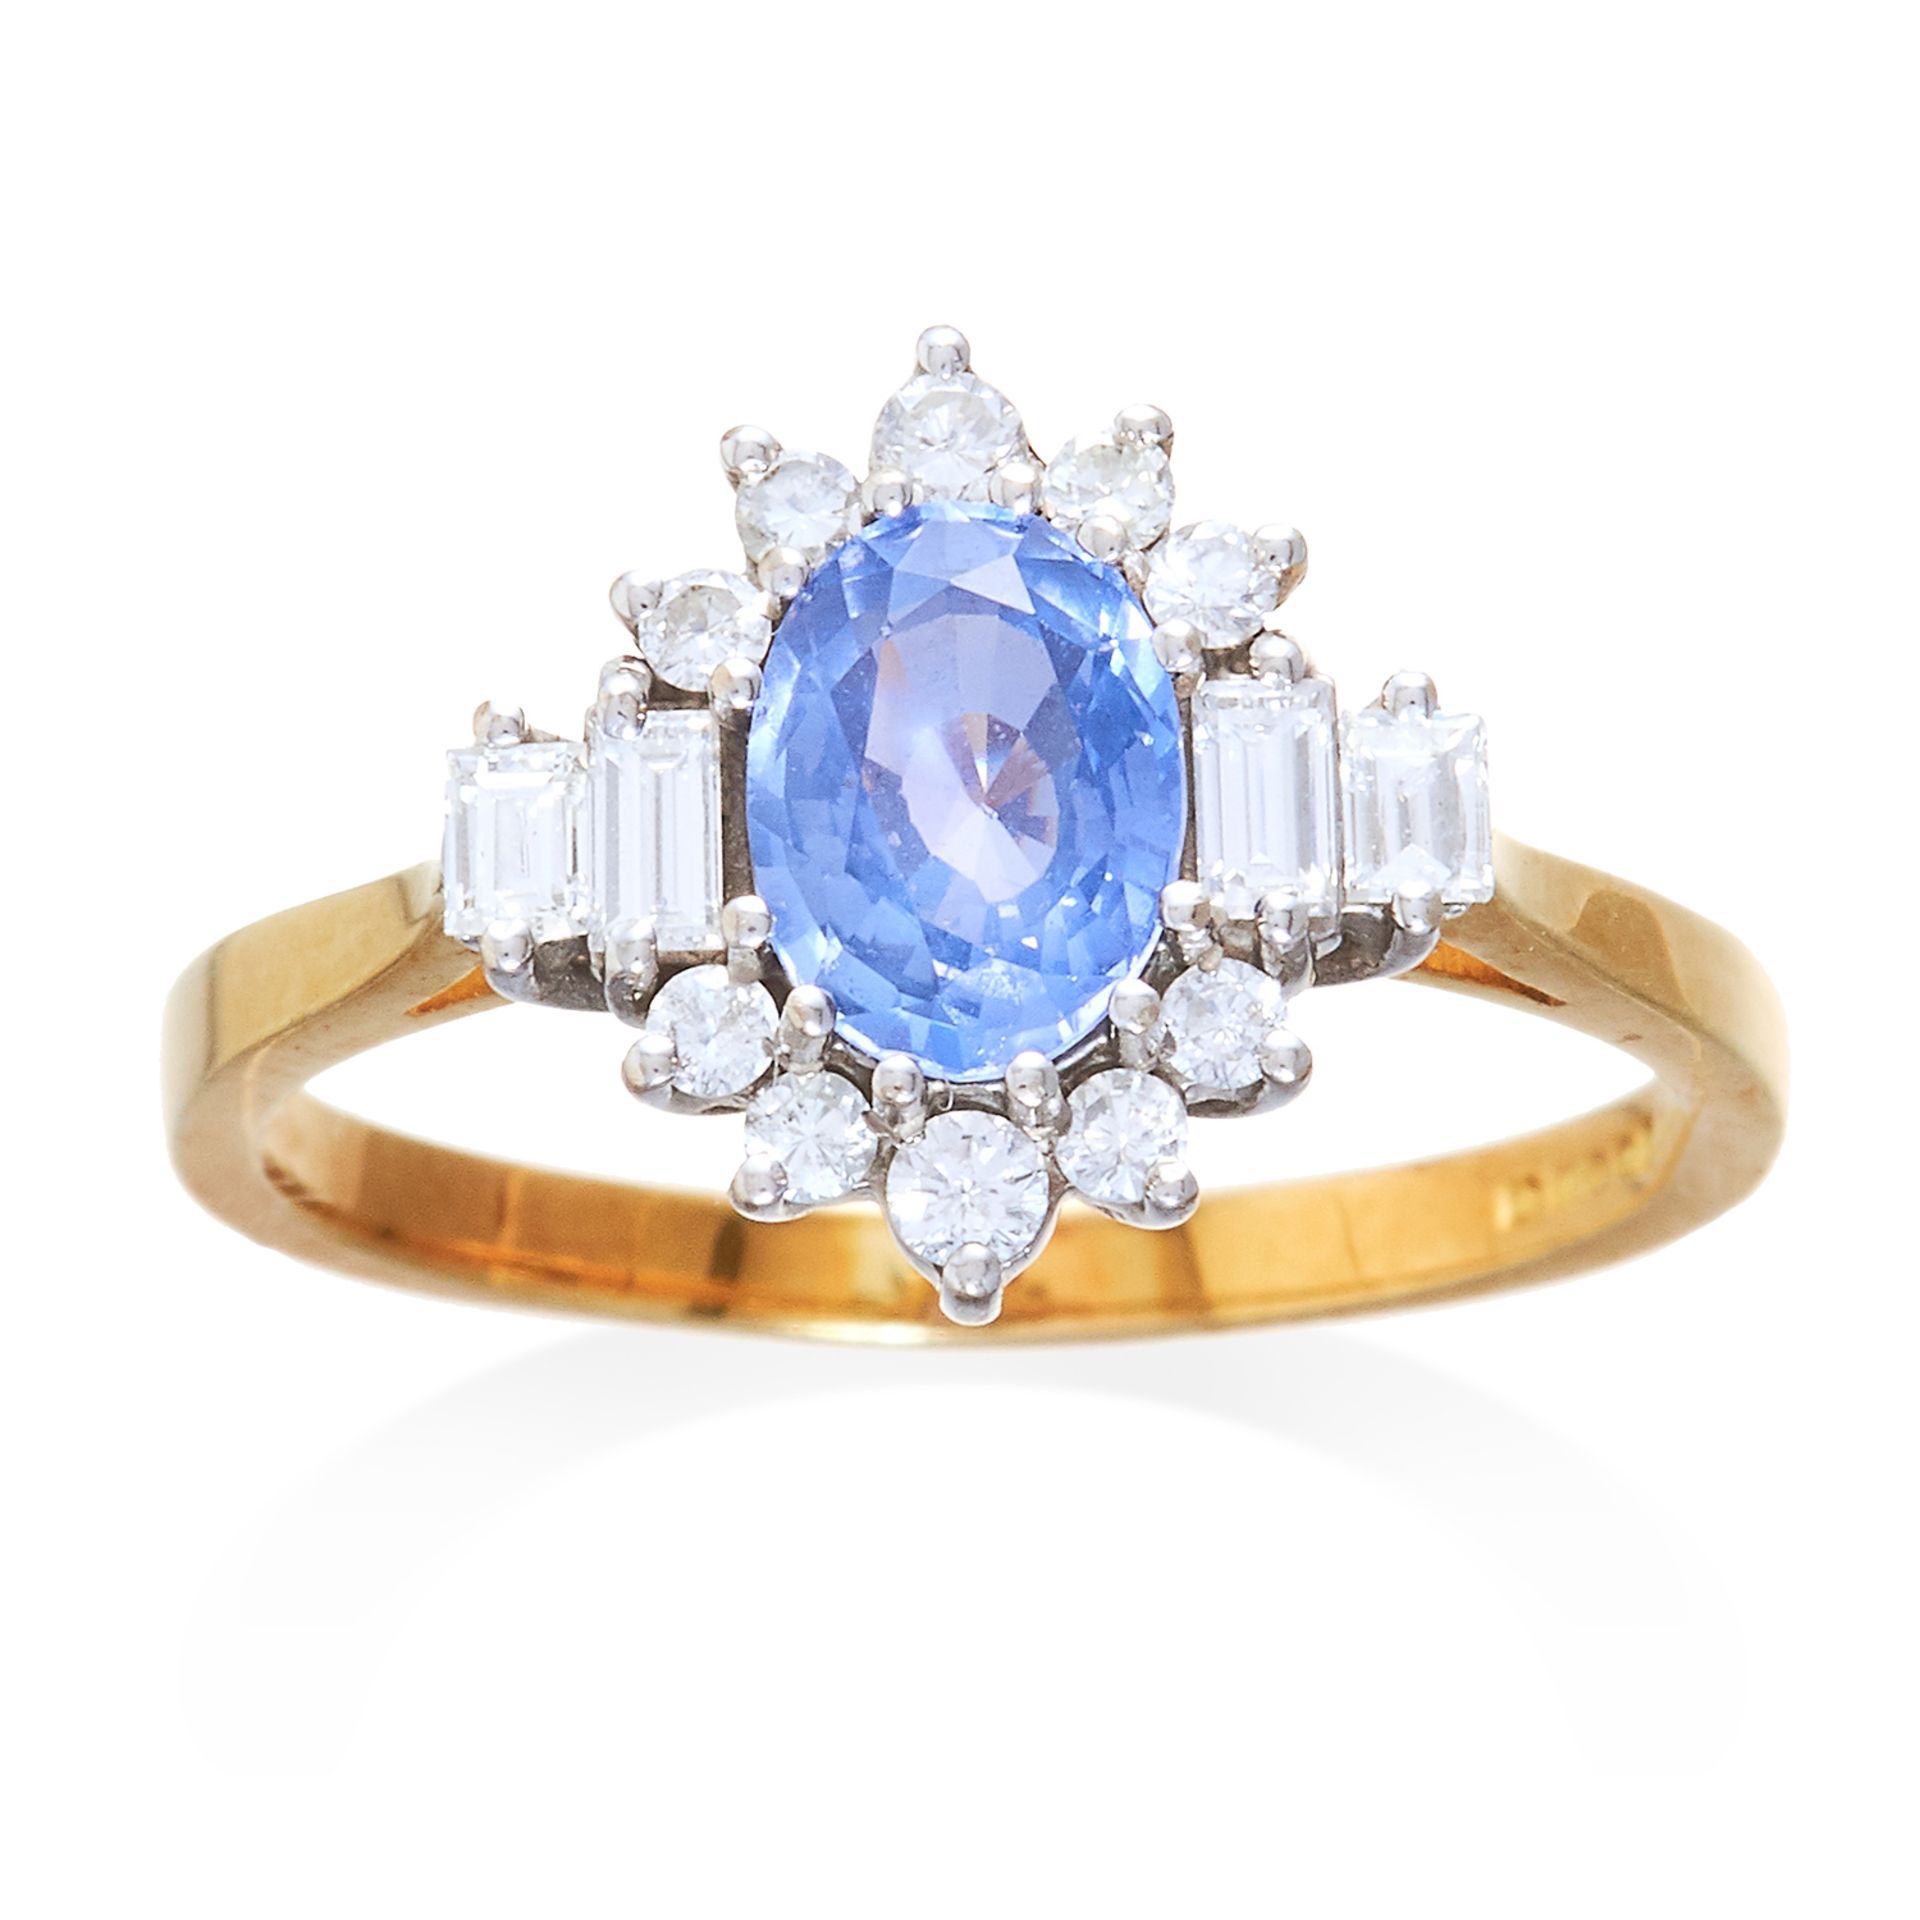 A SAPPHIRE AND DIAMOND CLUSTER RING in 18ct yellow gold, set with a central oval cut sapphire of